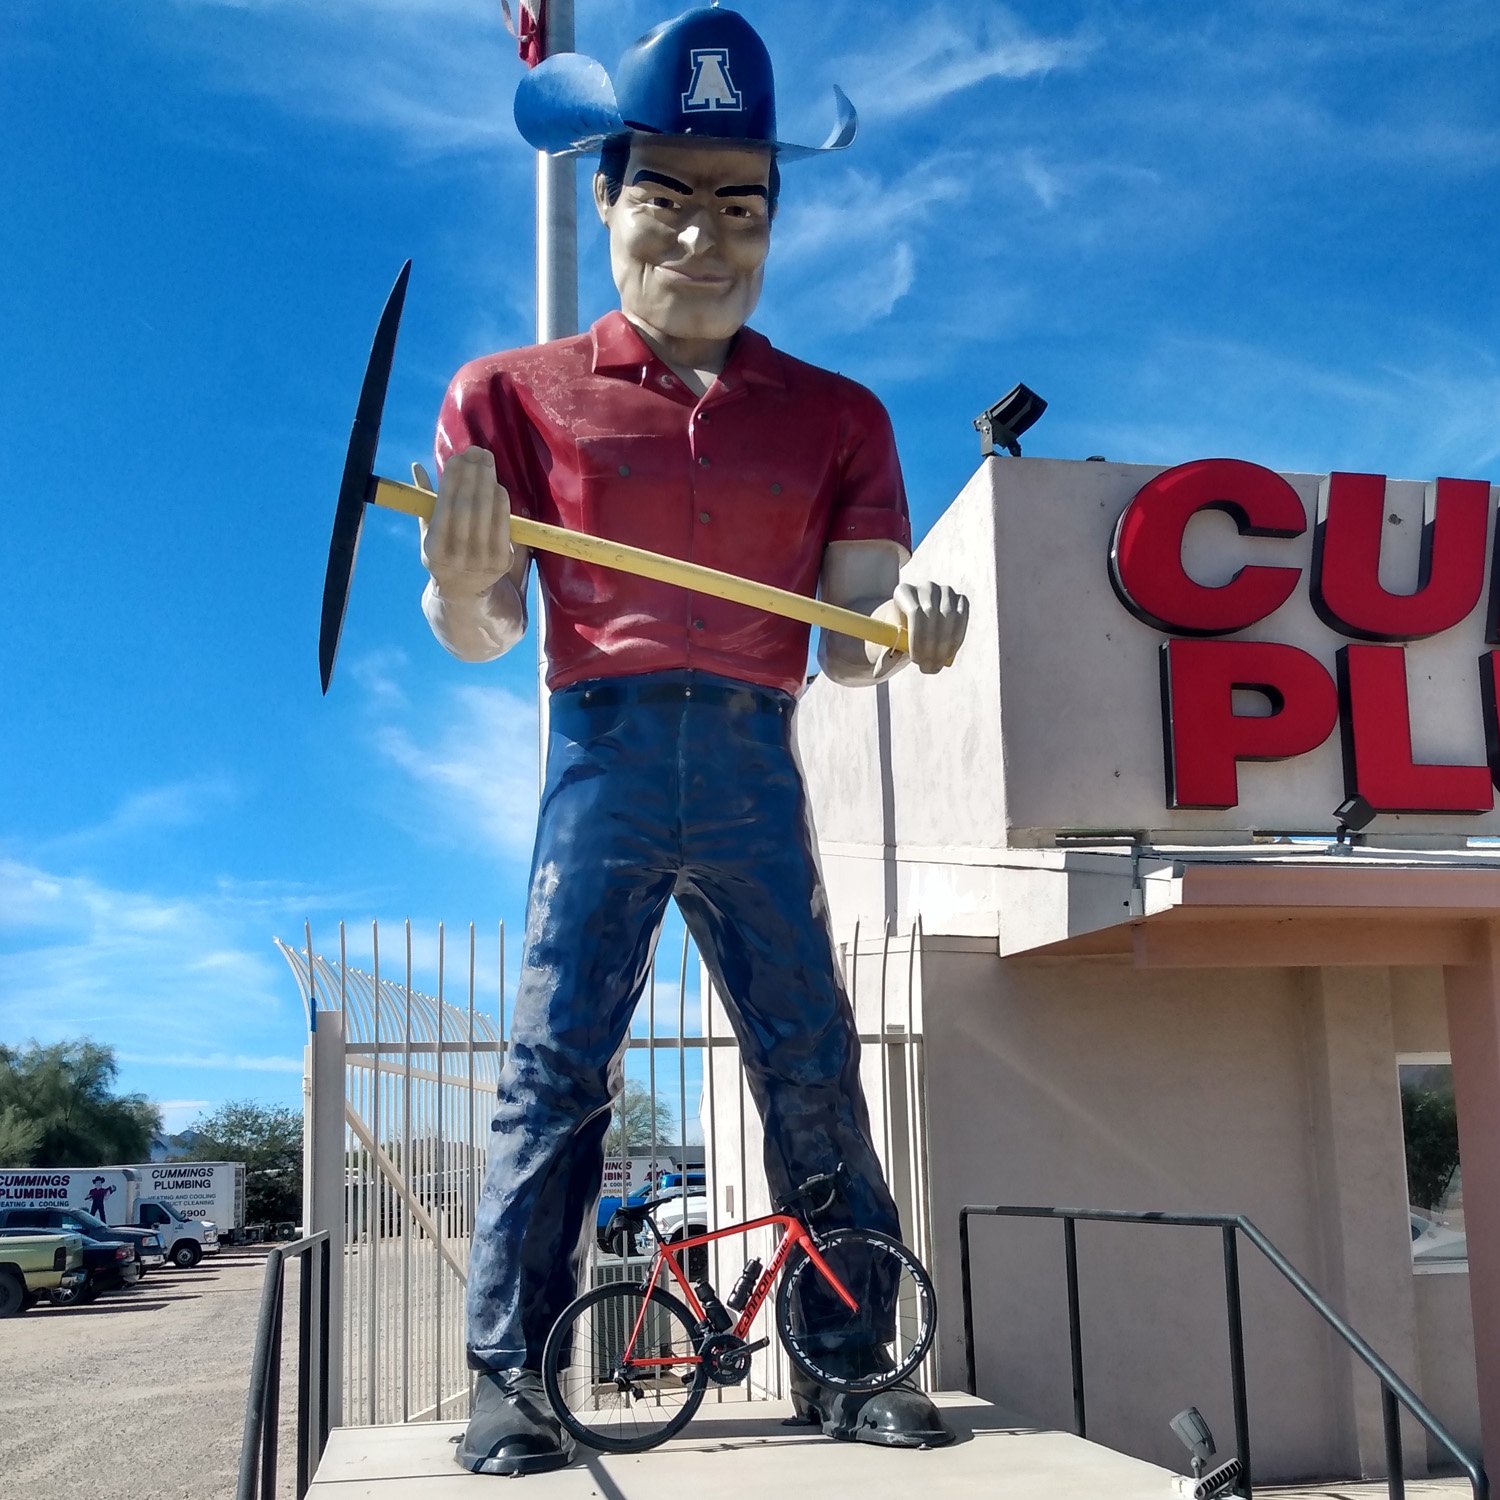 Of course Tuscon has its share of large interesting statues and I have enough brain damage to visit them all.